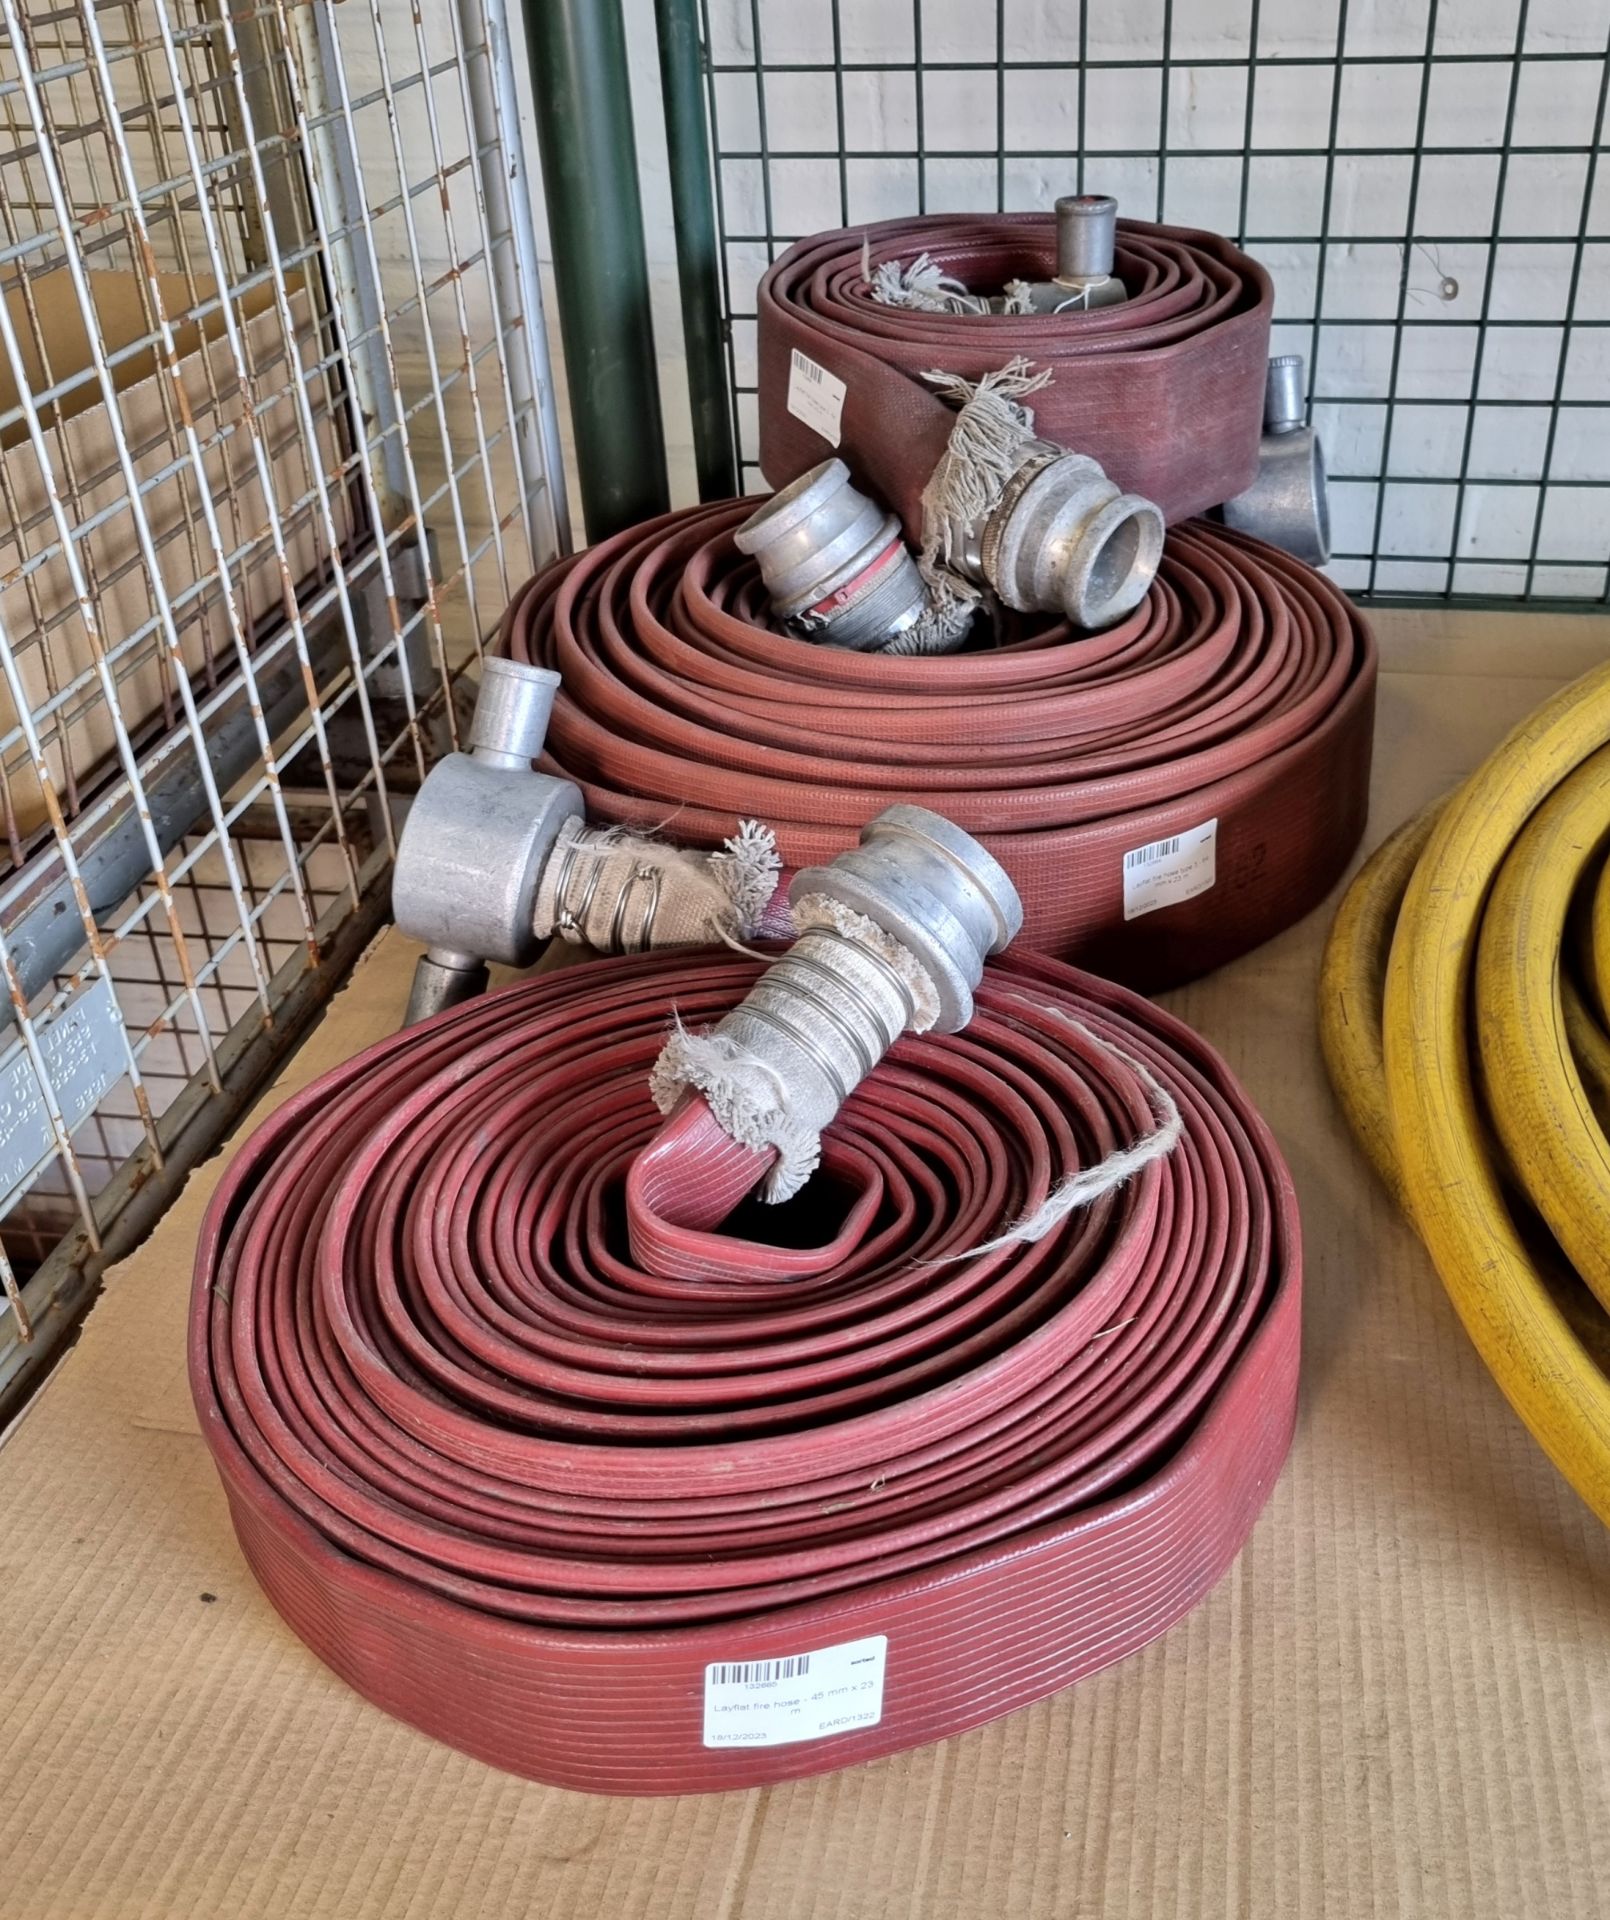 Yellow high pressure hose - 45mm dia x 10m, Layflat fire hose - see description for details - Image 3 of 5